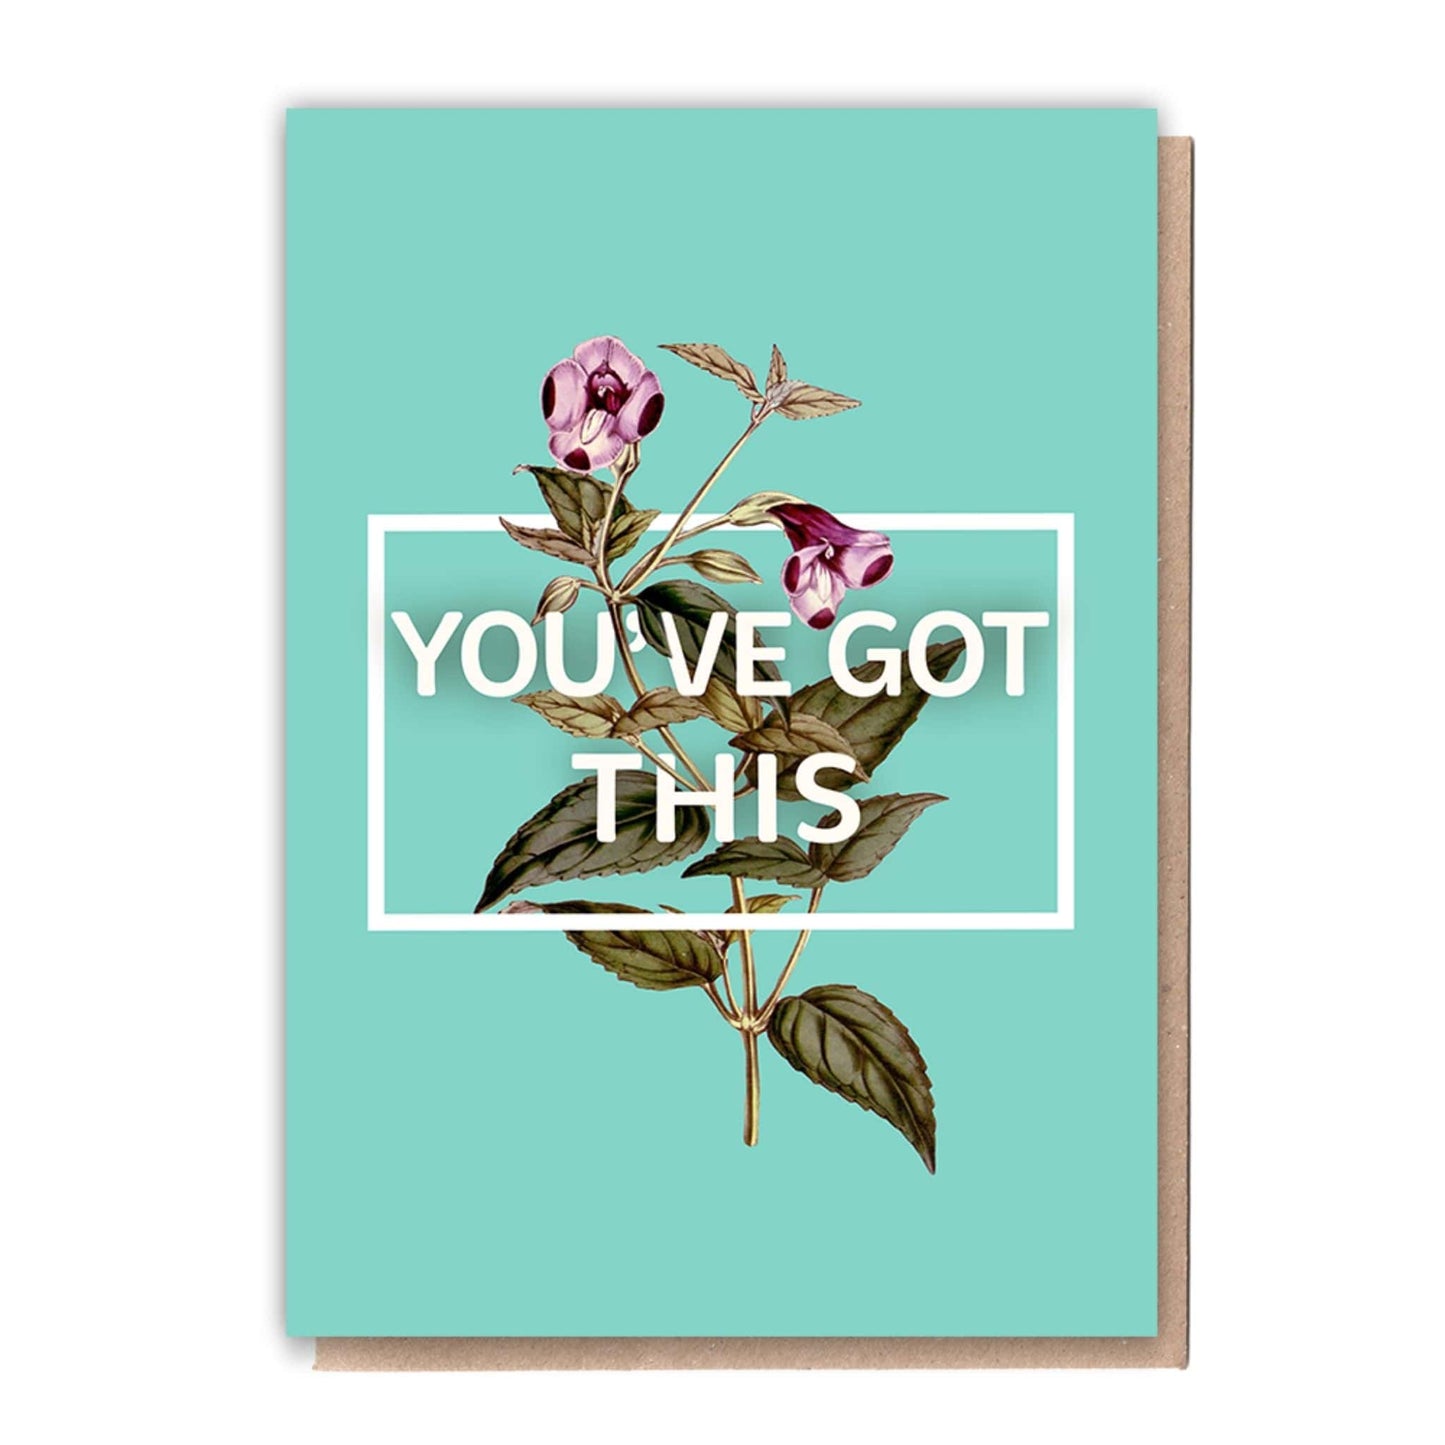 Mindful Moment Gift set - You've Got This recycled greetings card